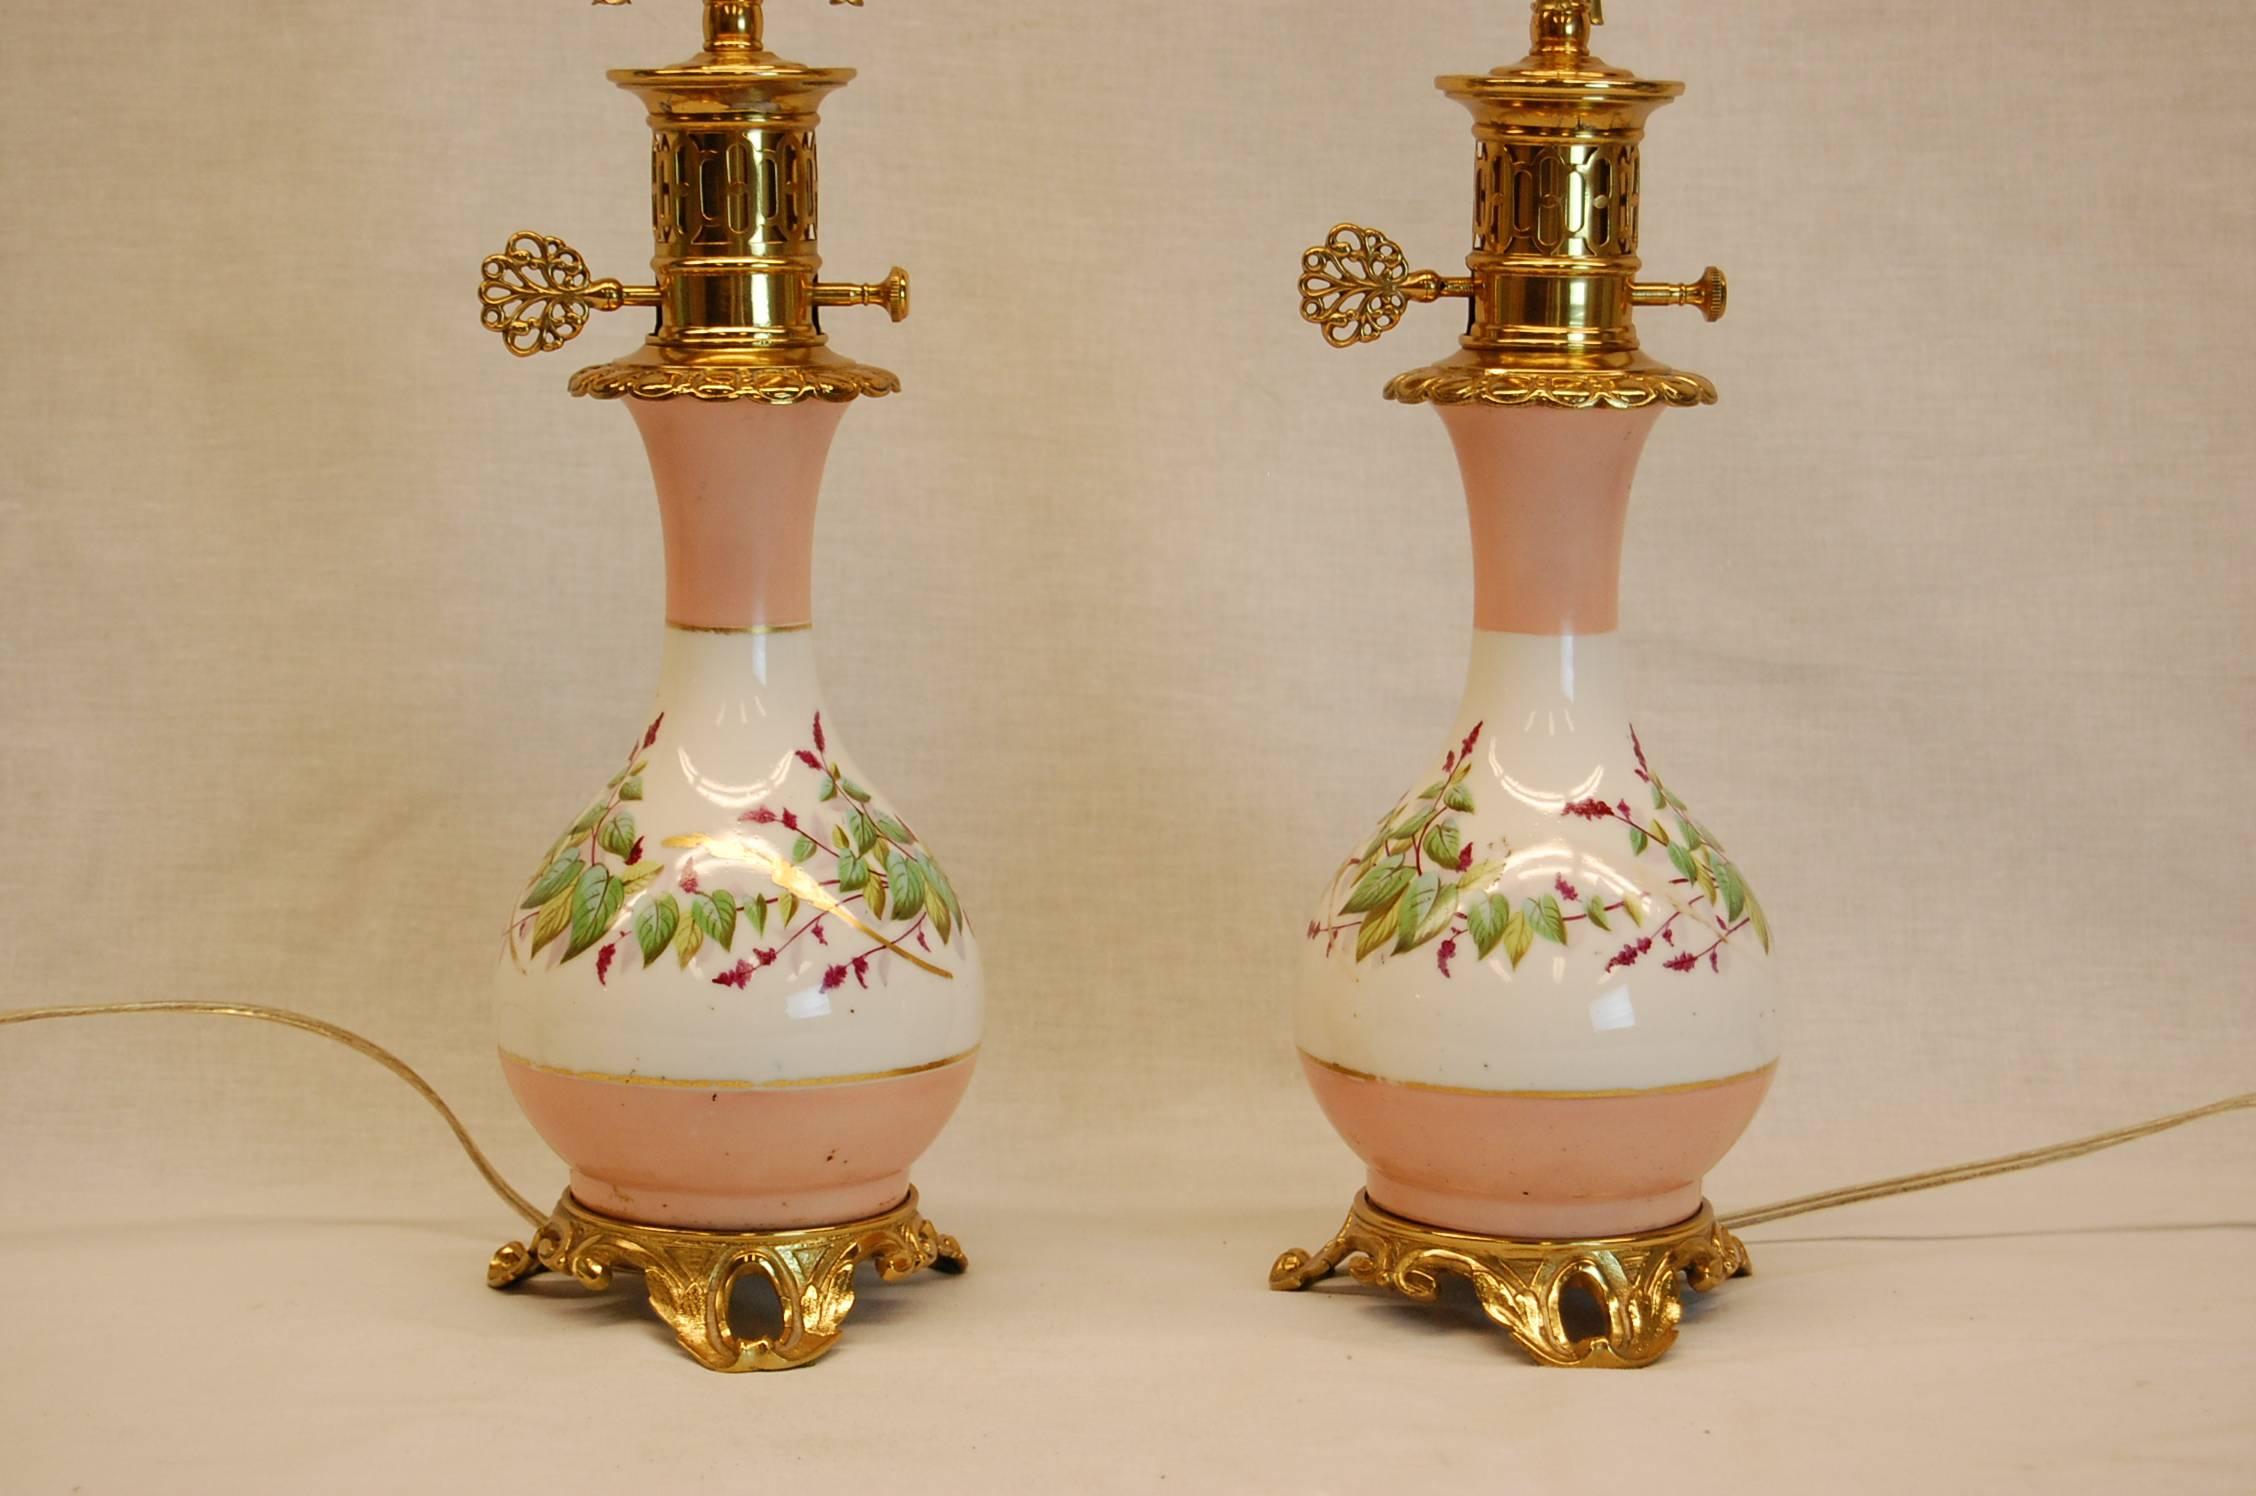 Hand-Crafted Pair of Mid 19th Century Porcelain Hand-Painted French or English Oil Lamps For Sale